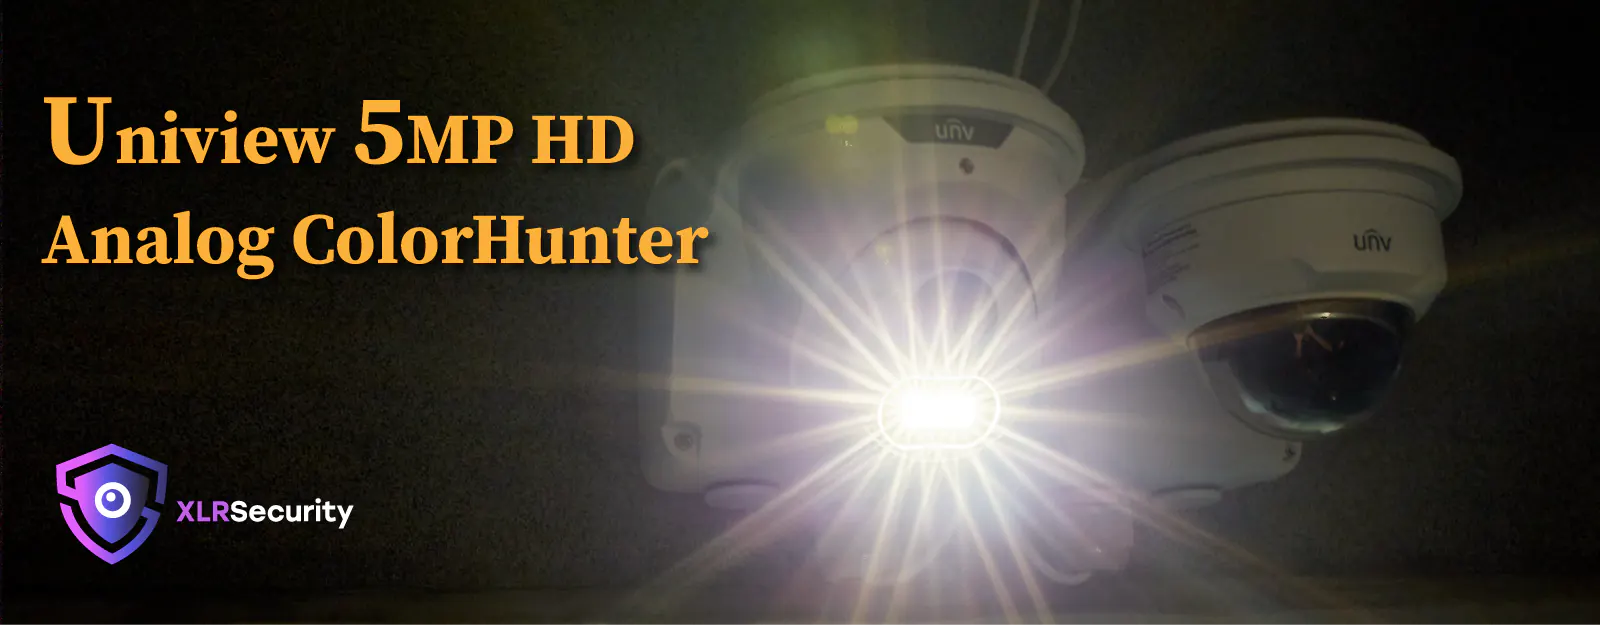 Banner image showing a security camera with a powerful bright white light shining